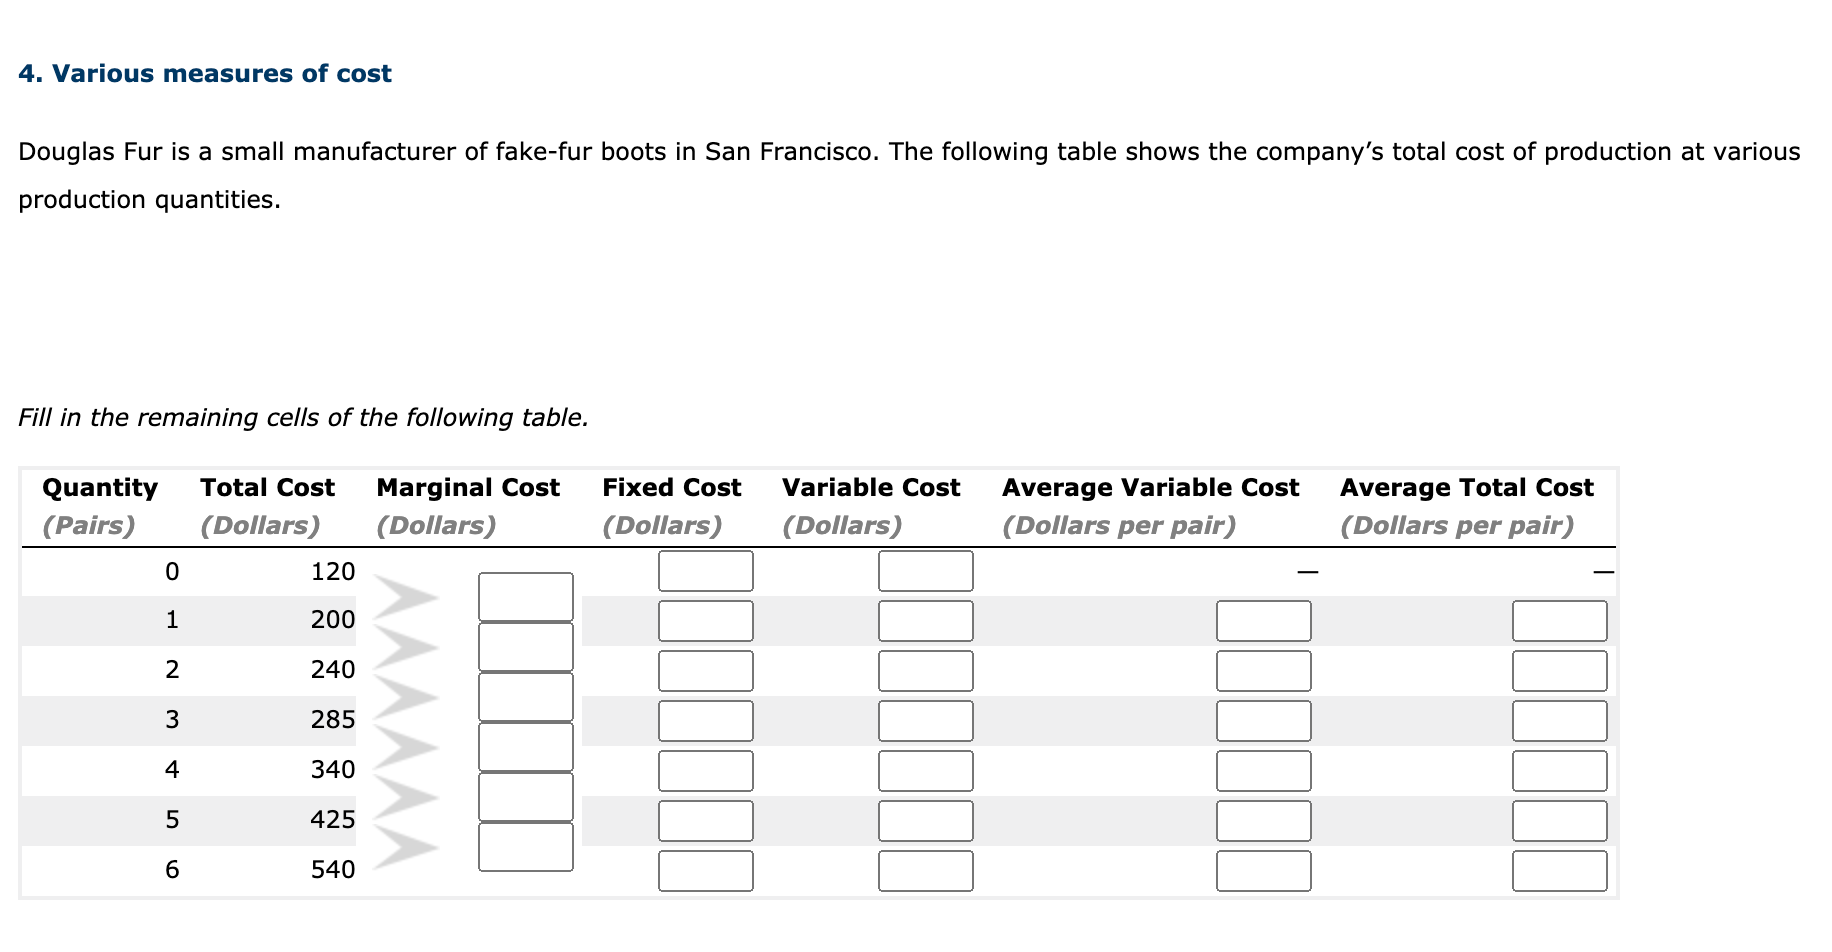 Fill in the remaining cells of the following table.
Average Total Cost
(Dollars per pair)
Quantity
Total Cost
Marginal Cost
Fixed Cost
Variable Cost
Average Variable Cost
(Pairs)
(Dollars)
(Dollars)
(Dollars)
(Dollars)
(Dollars per pair)
120
1
200
240
285
4
340
425
6.
540
